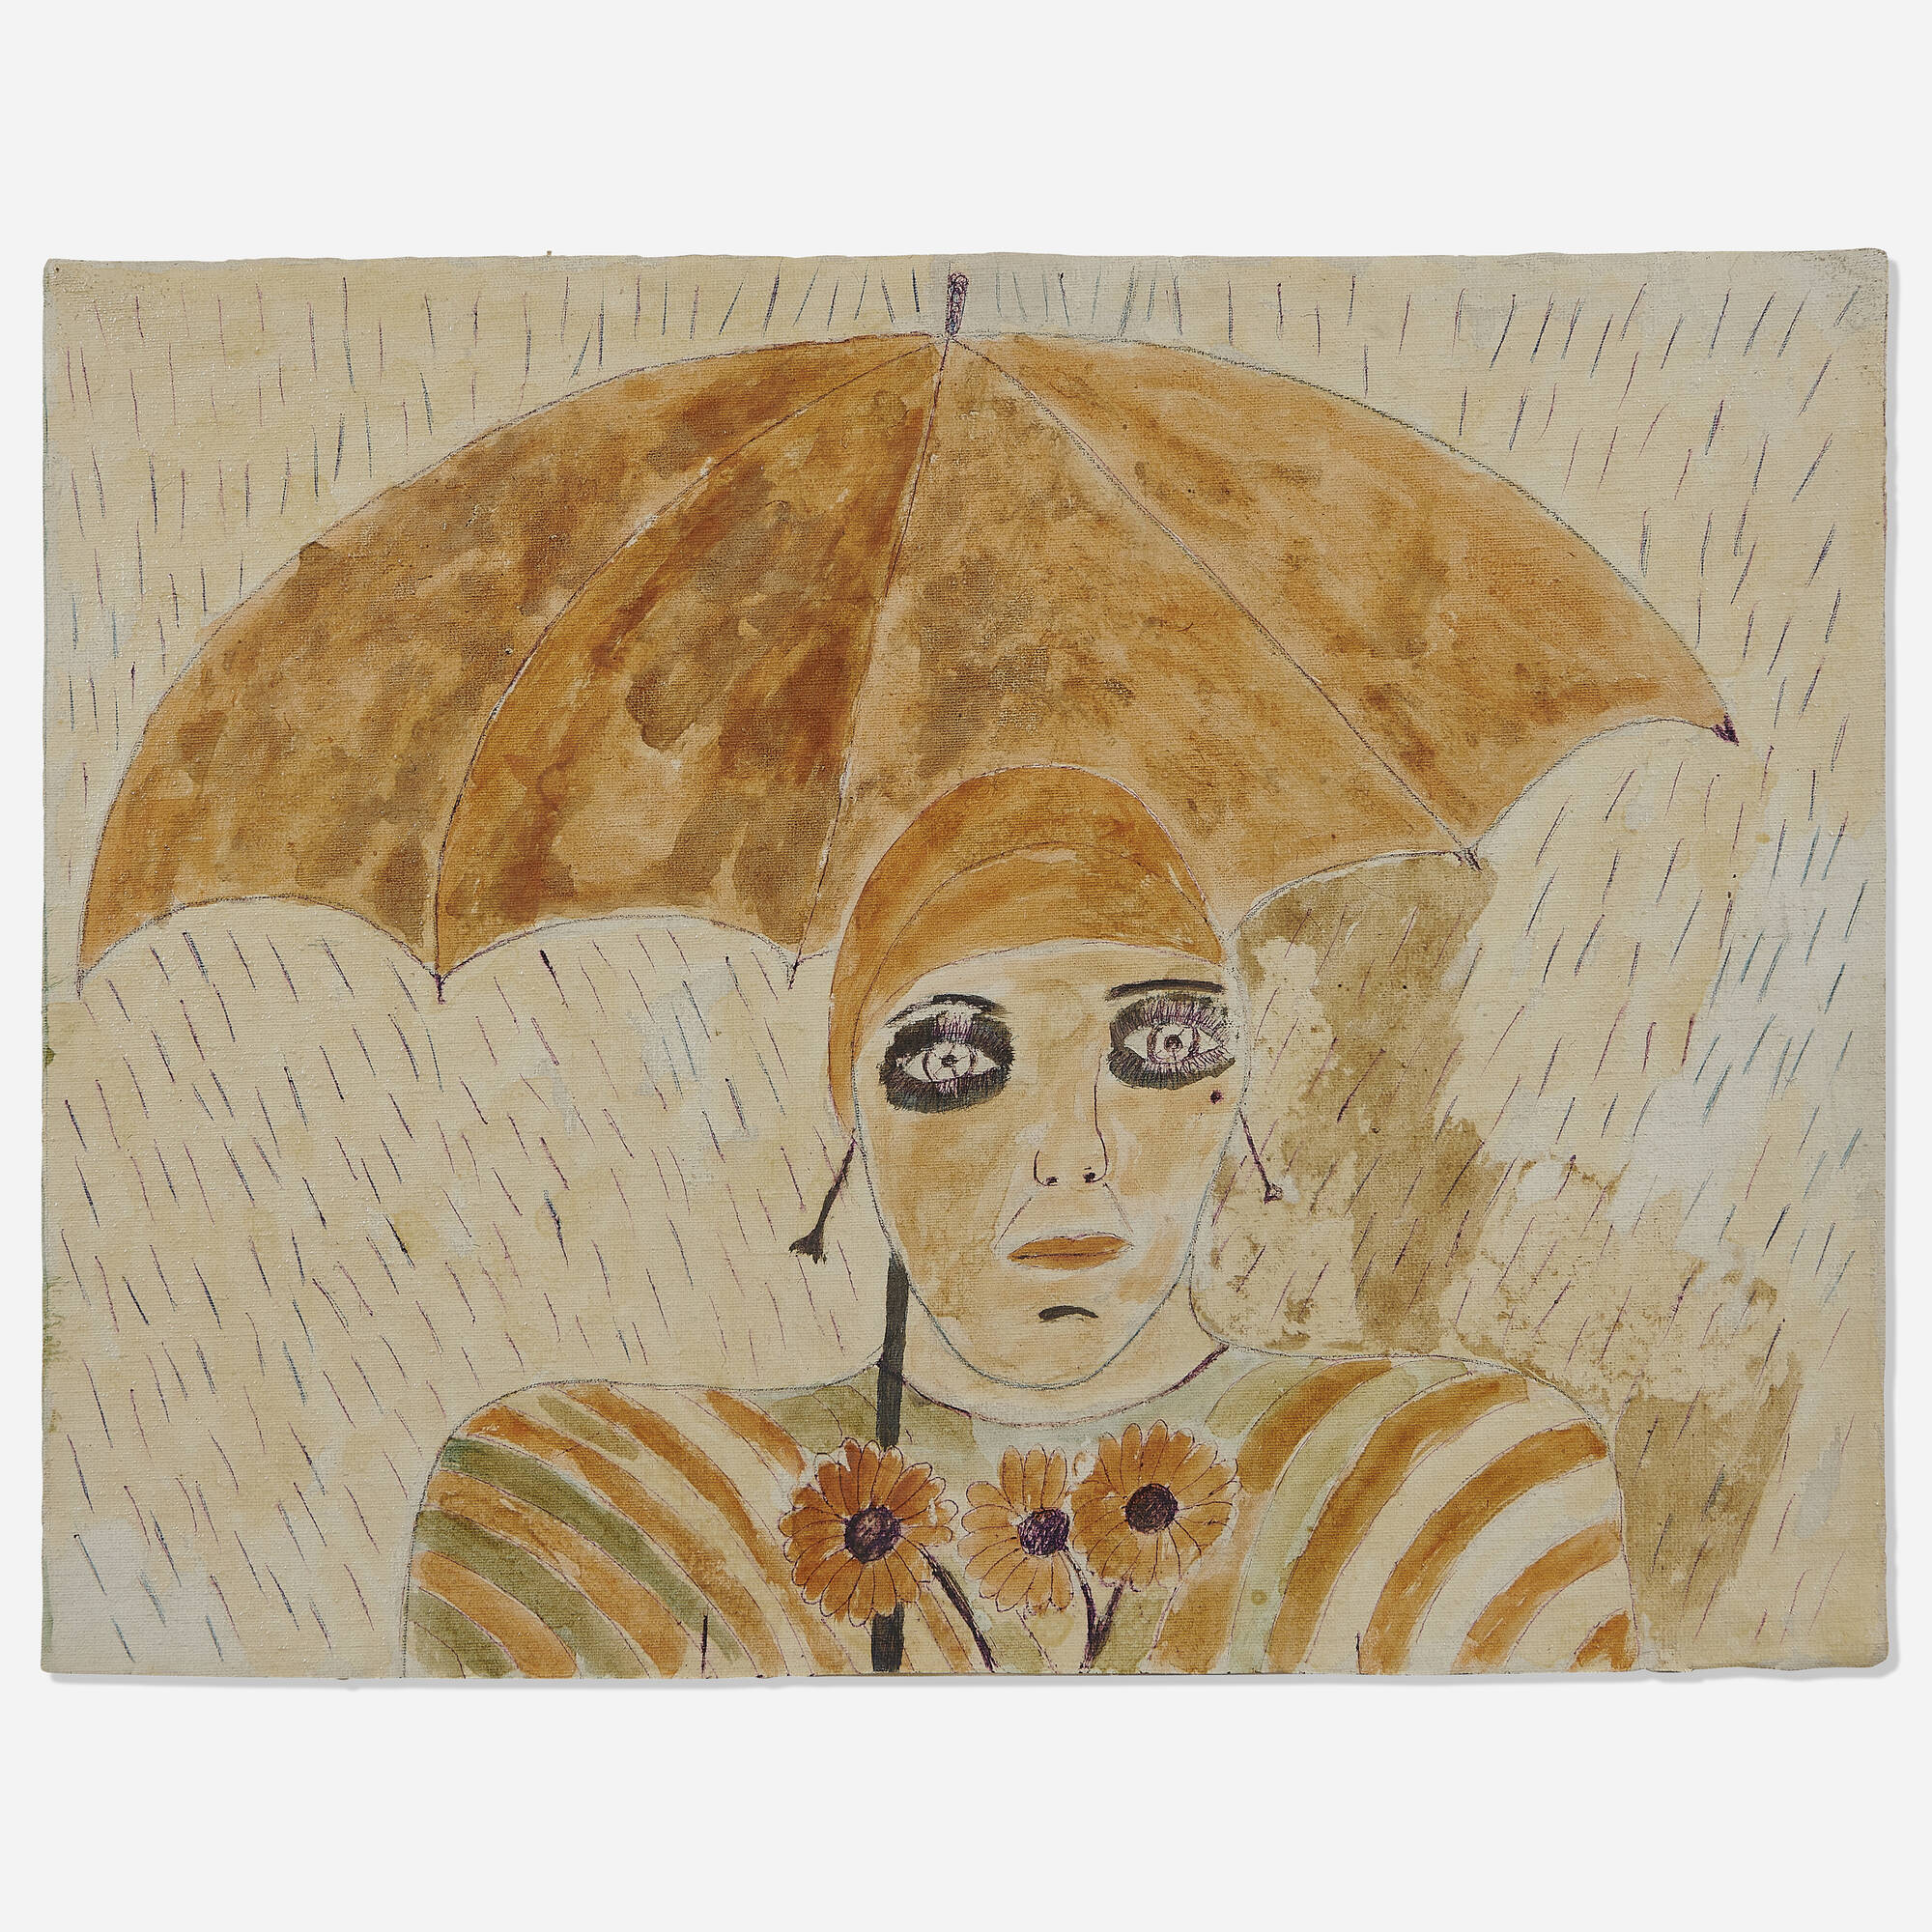 144: LEE GODIE, Woman with Umbrella and Daisies < Folk, Outsider &  Self-Taught Art + Americana, 11 October 2022 < Auctions | Toomey & Co.  Auctioneers